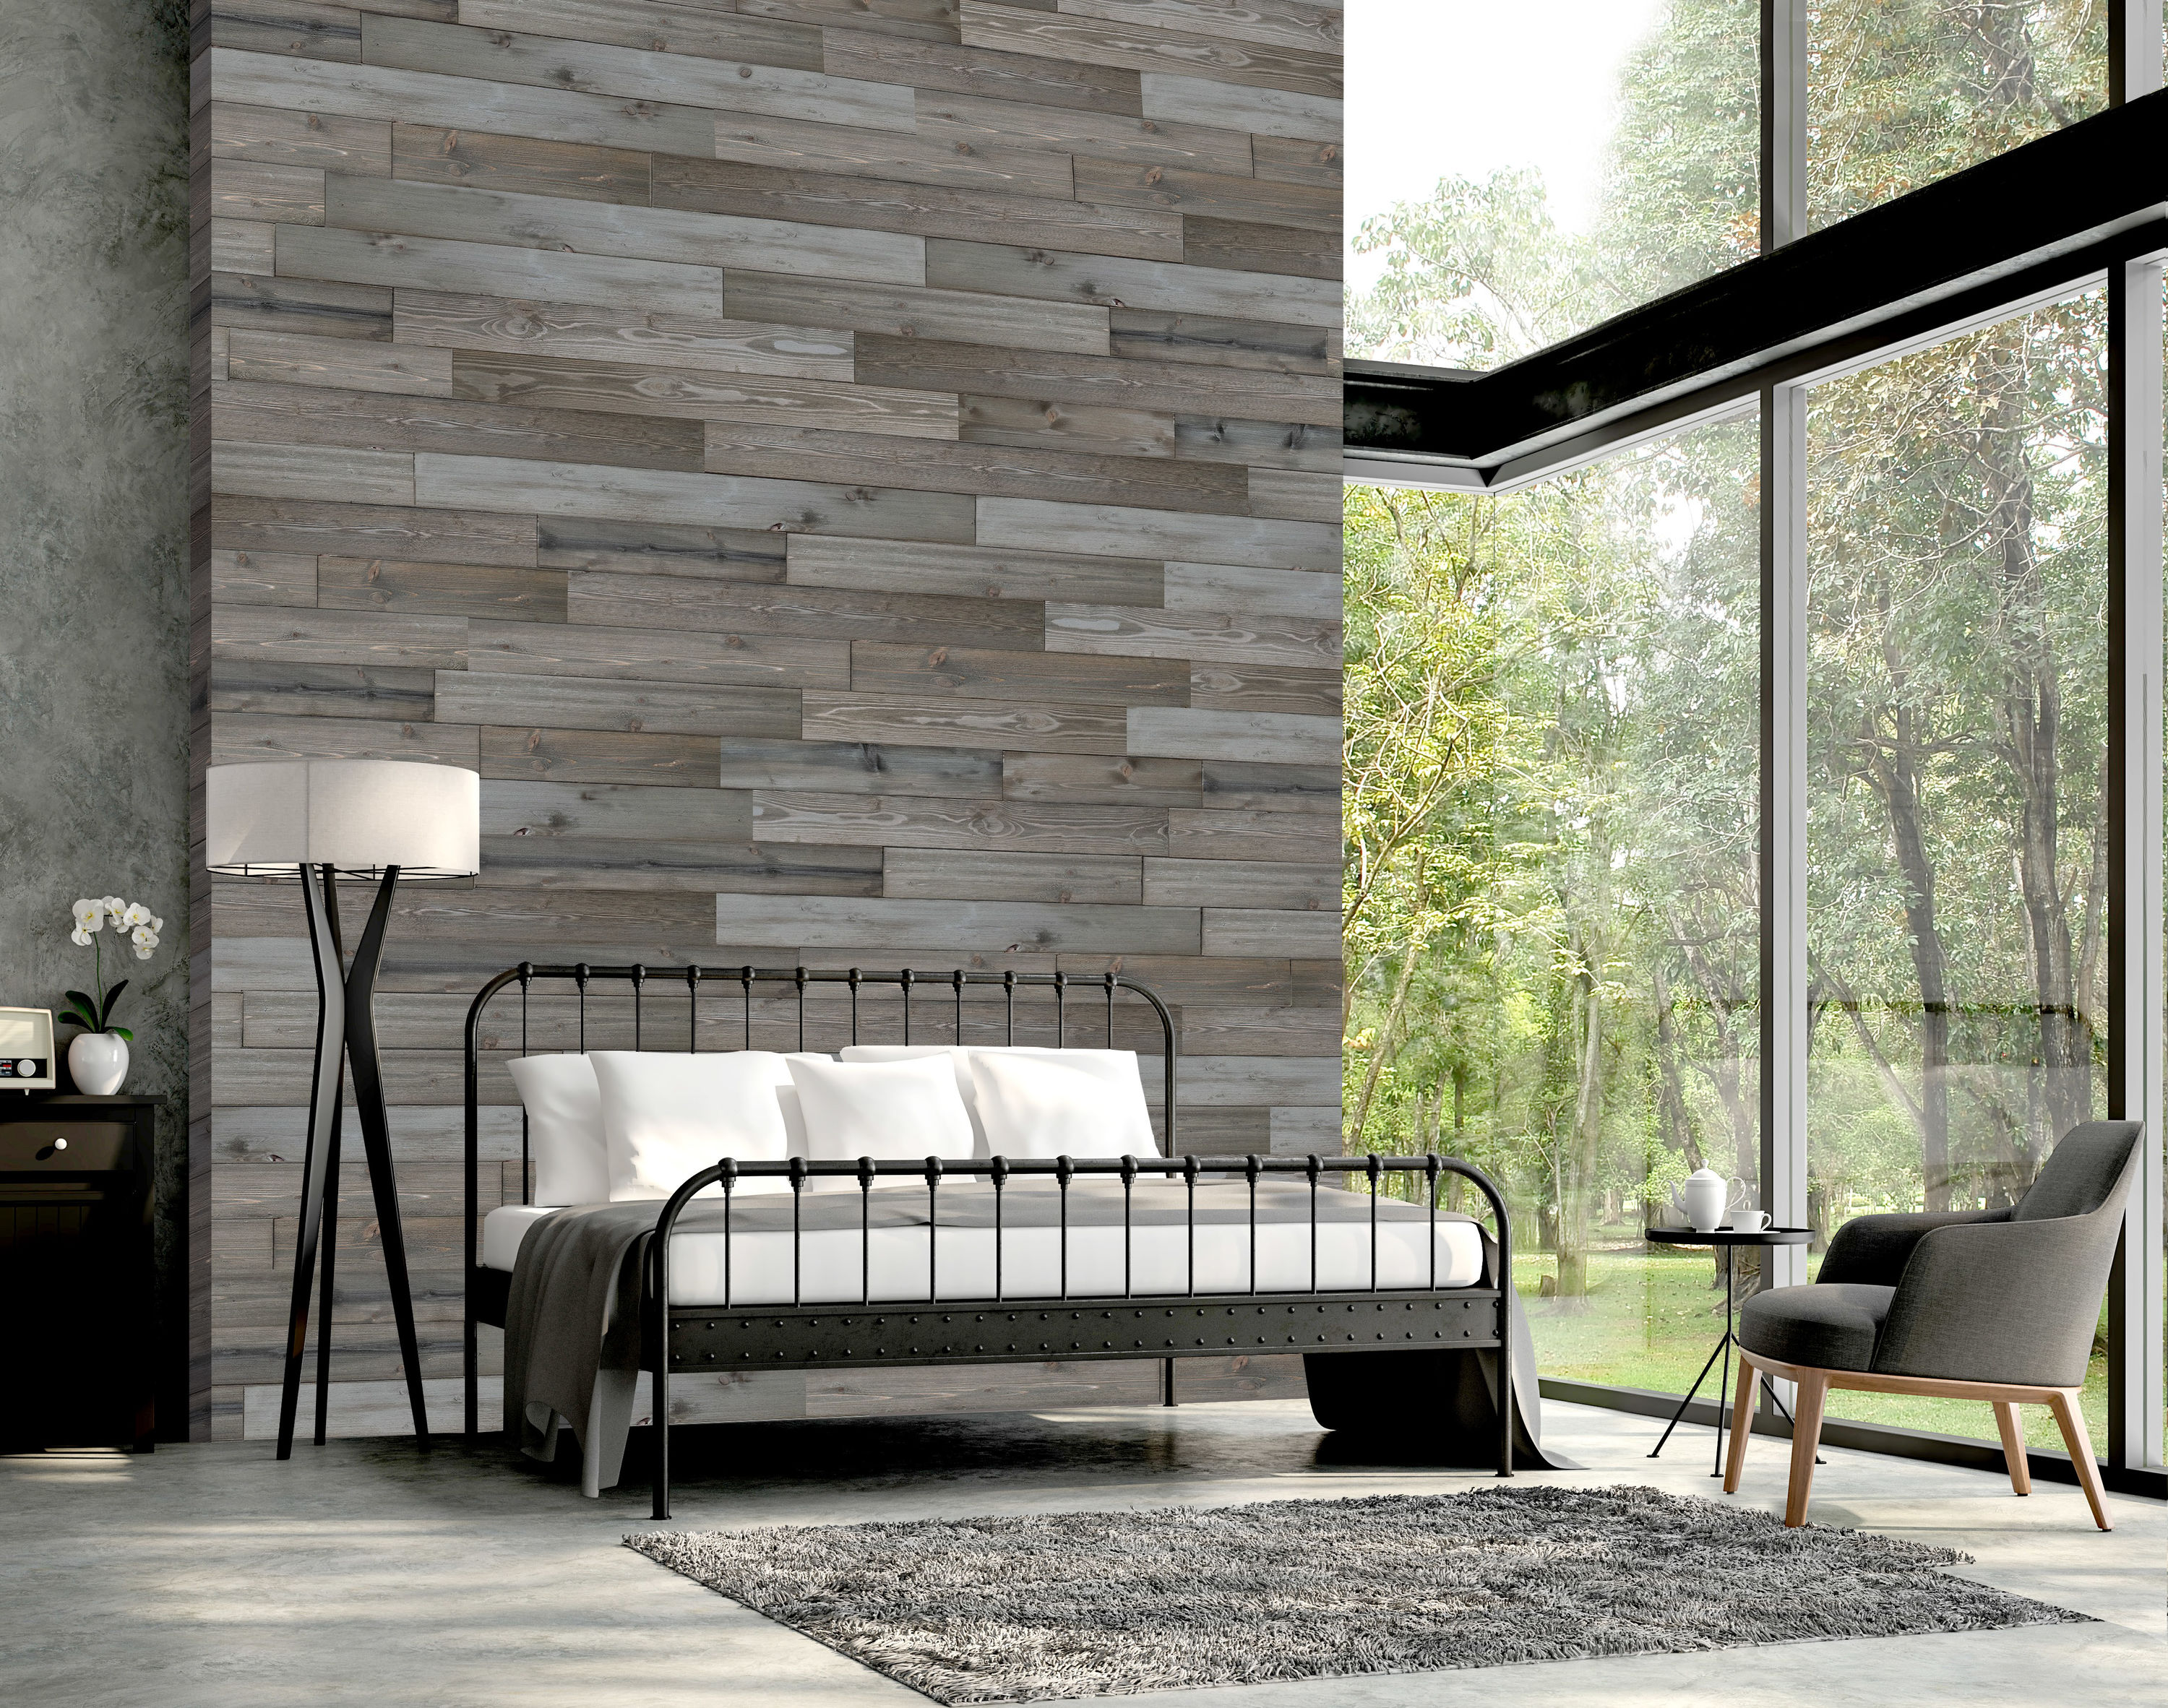 Woodywalls Reclaimed Wood Planks for Walls Wood Wall Panels 